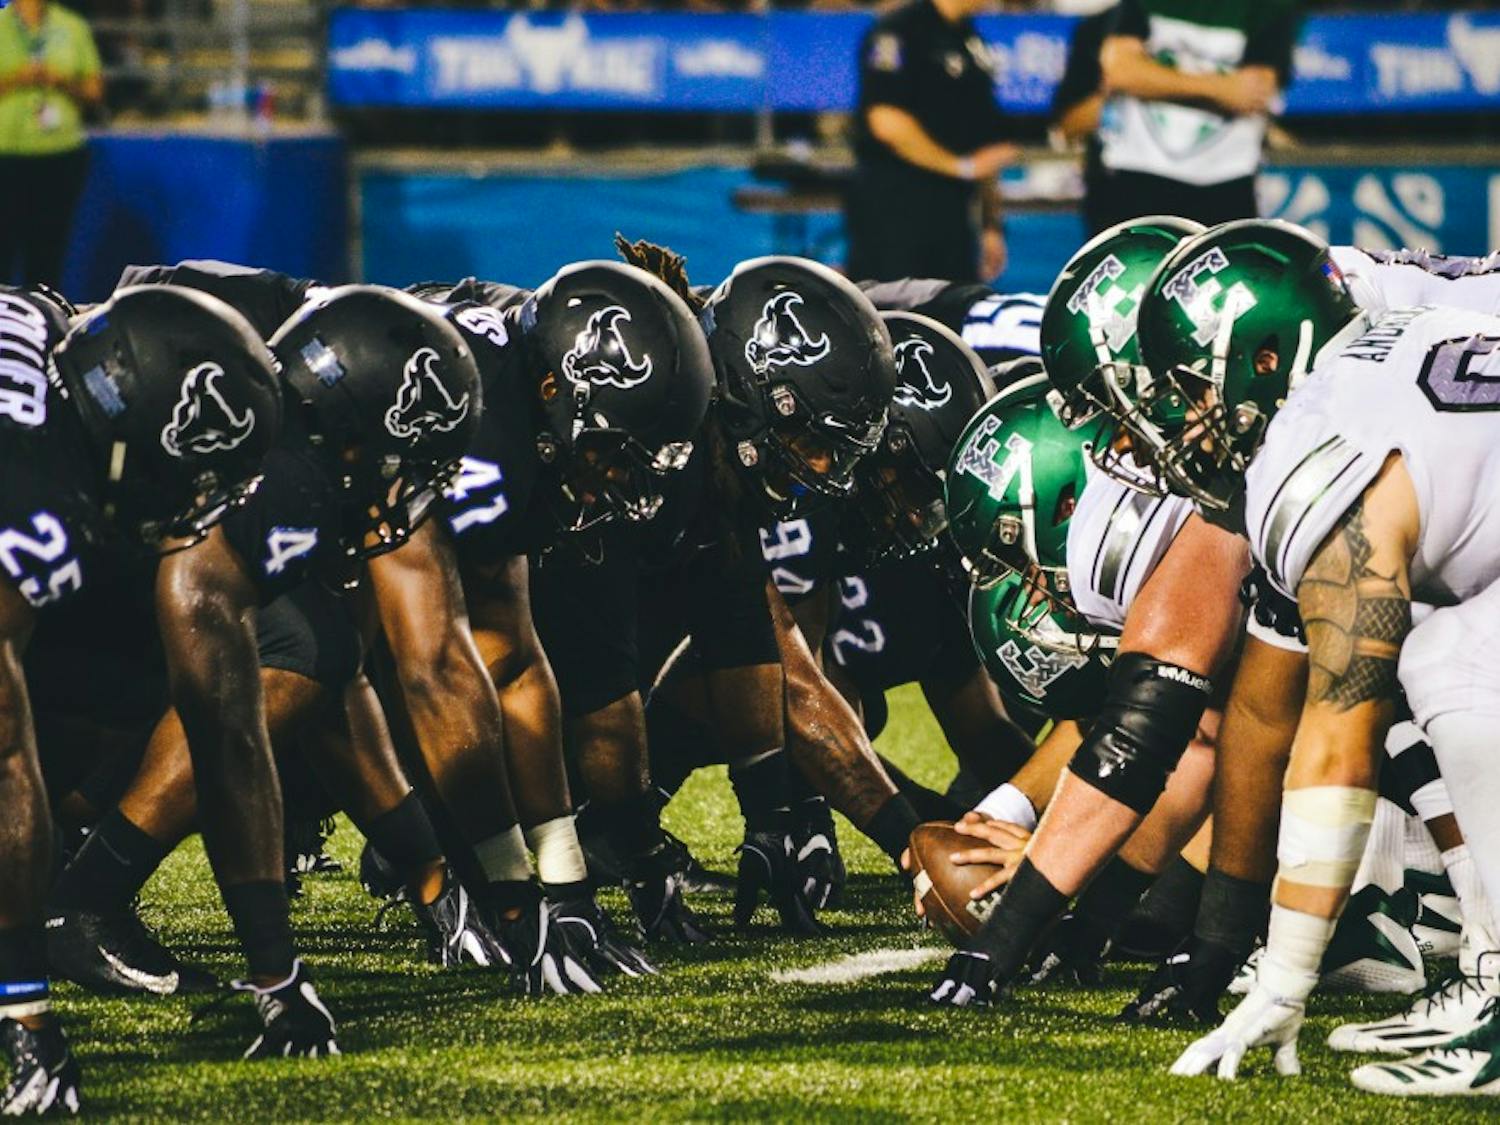 The UB defensive line meets Eastern Michigan at the line of scrimmage. Senior defensive end Chuck Harris, wearing number 41, finished the best game of his collegiate career with eight tackles, two and a half sacks and a forced fumble.